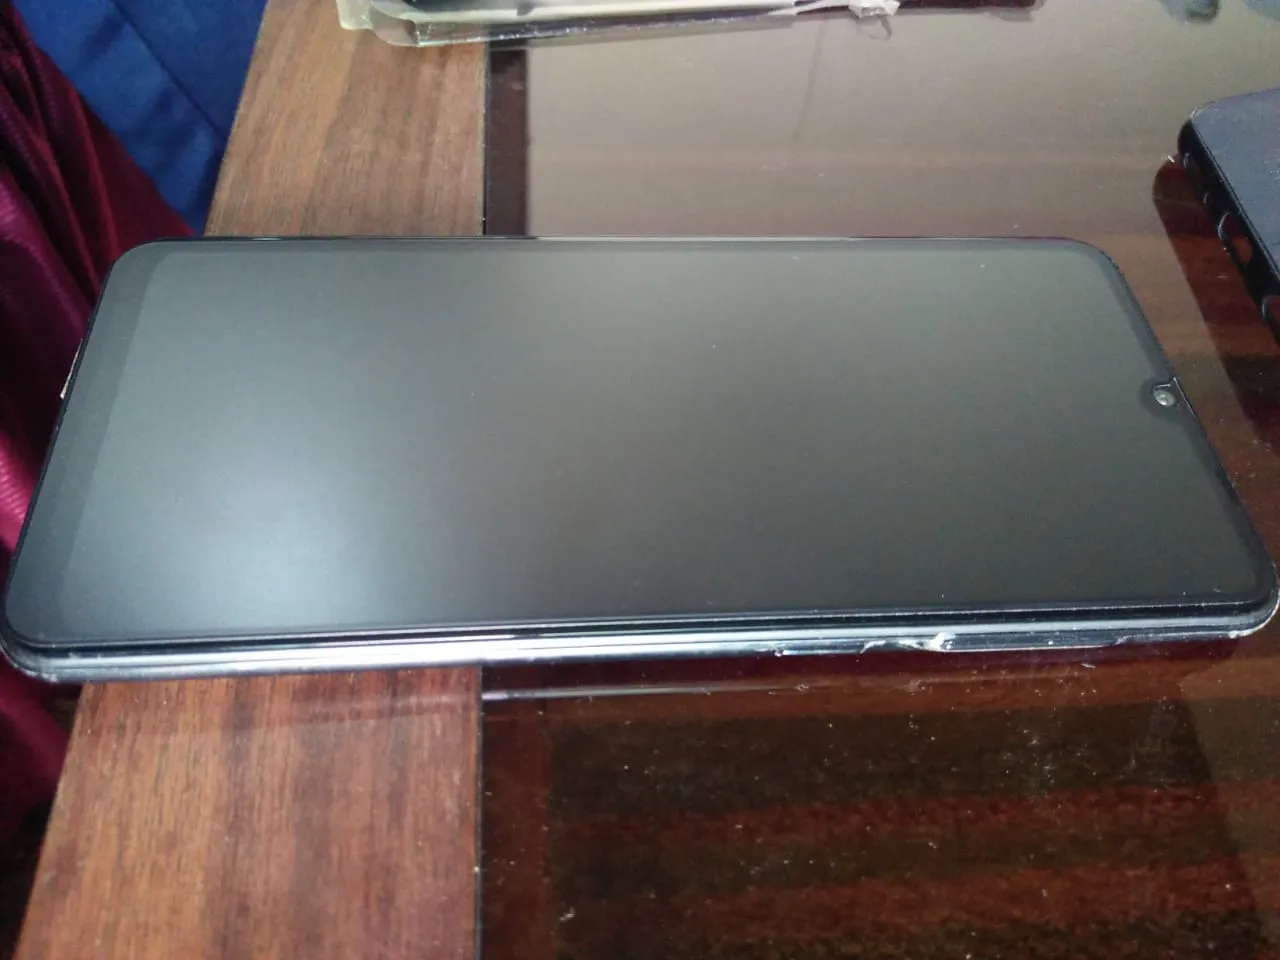 Samsung Galaxy A30 In Lush and just like new Condition - photo 3